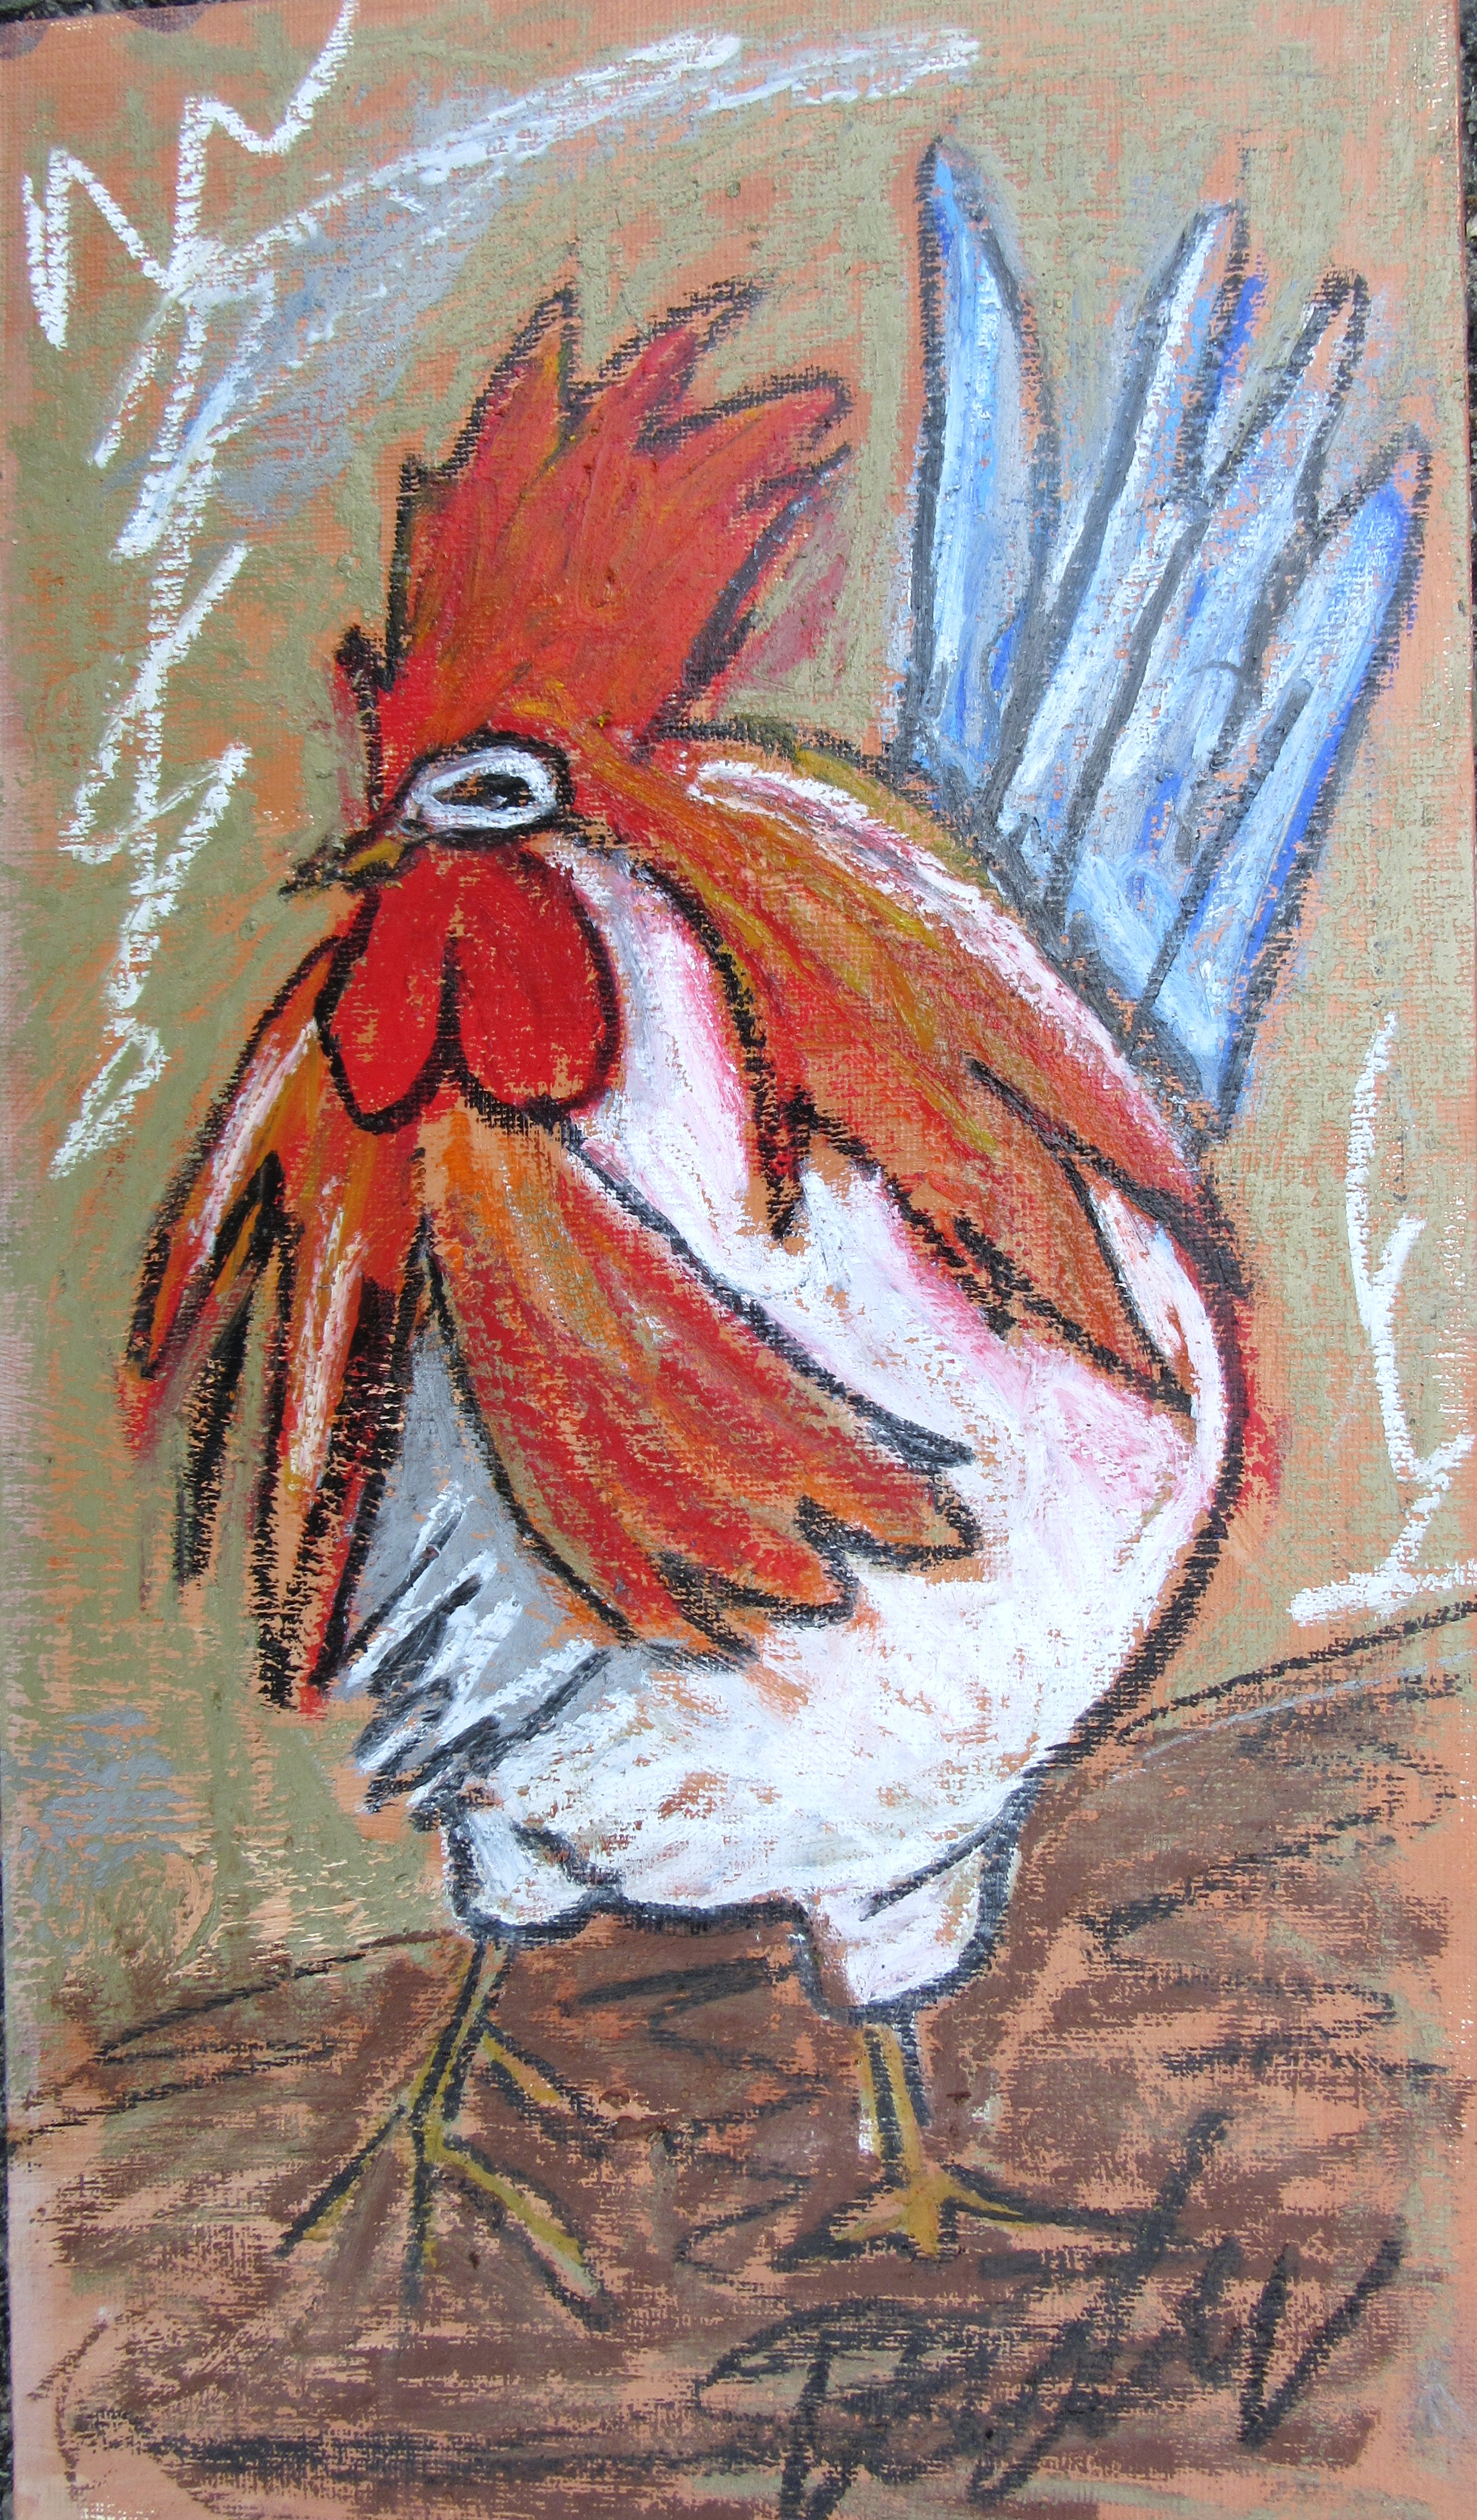 "BLUE TAILED ROOSTER"
16in x 9in
Oil on Canvas Board